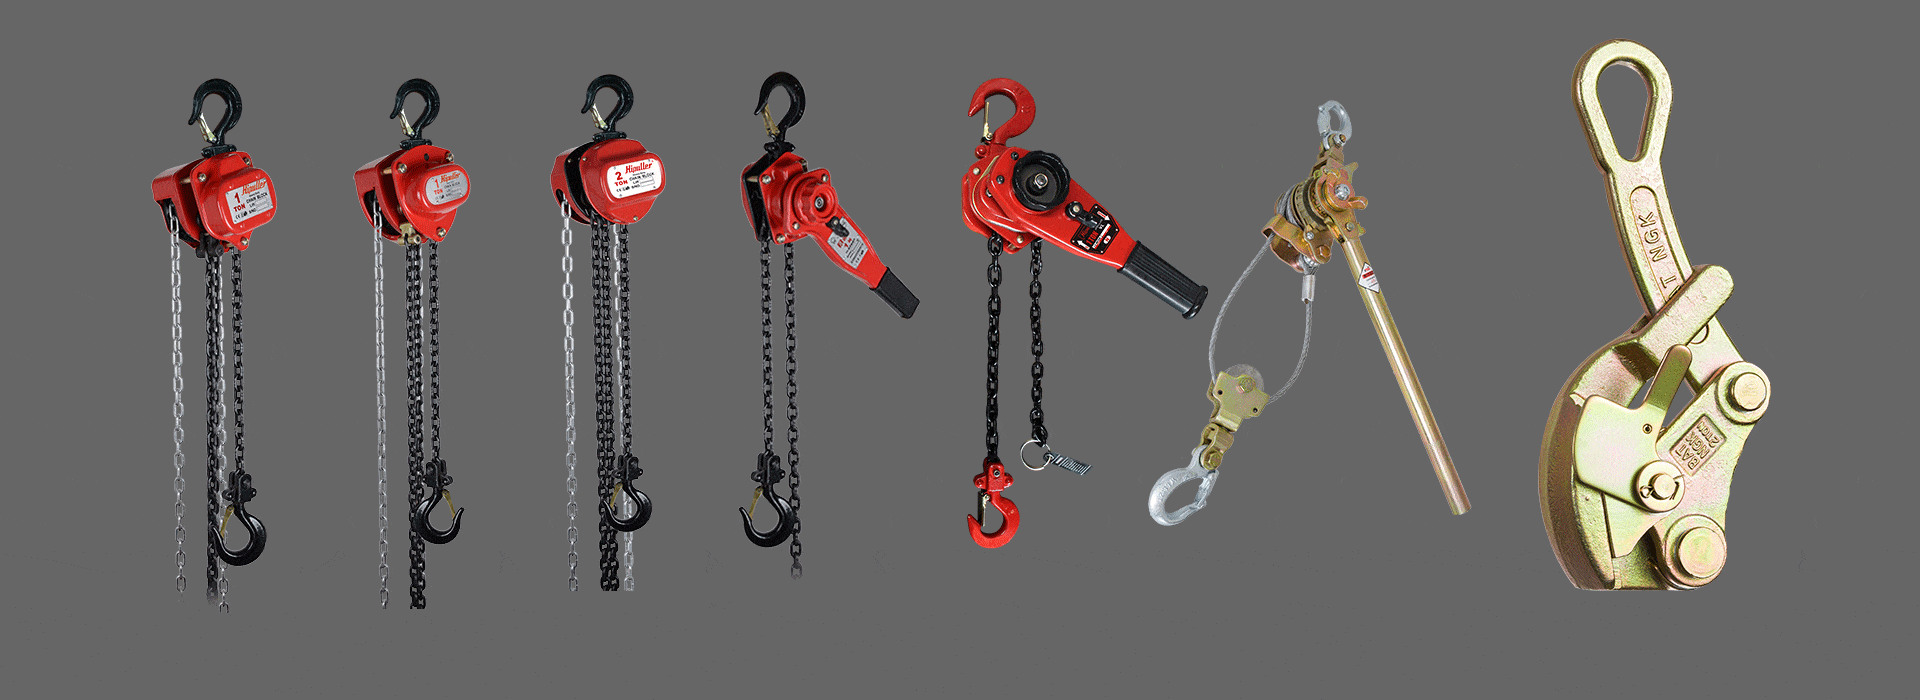 HAND HOIST SERIES PRODUCTS